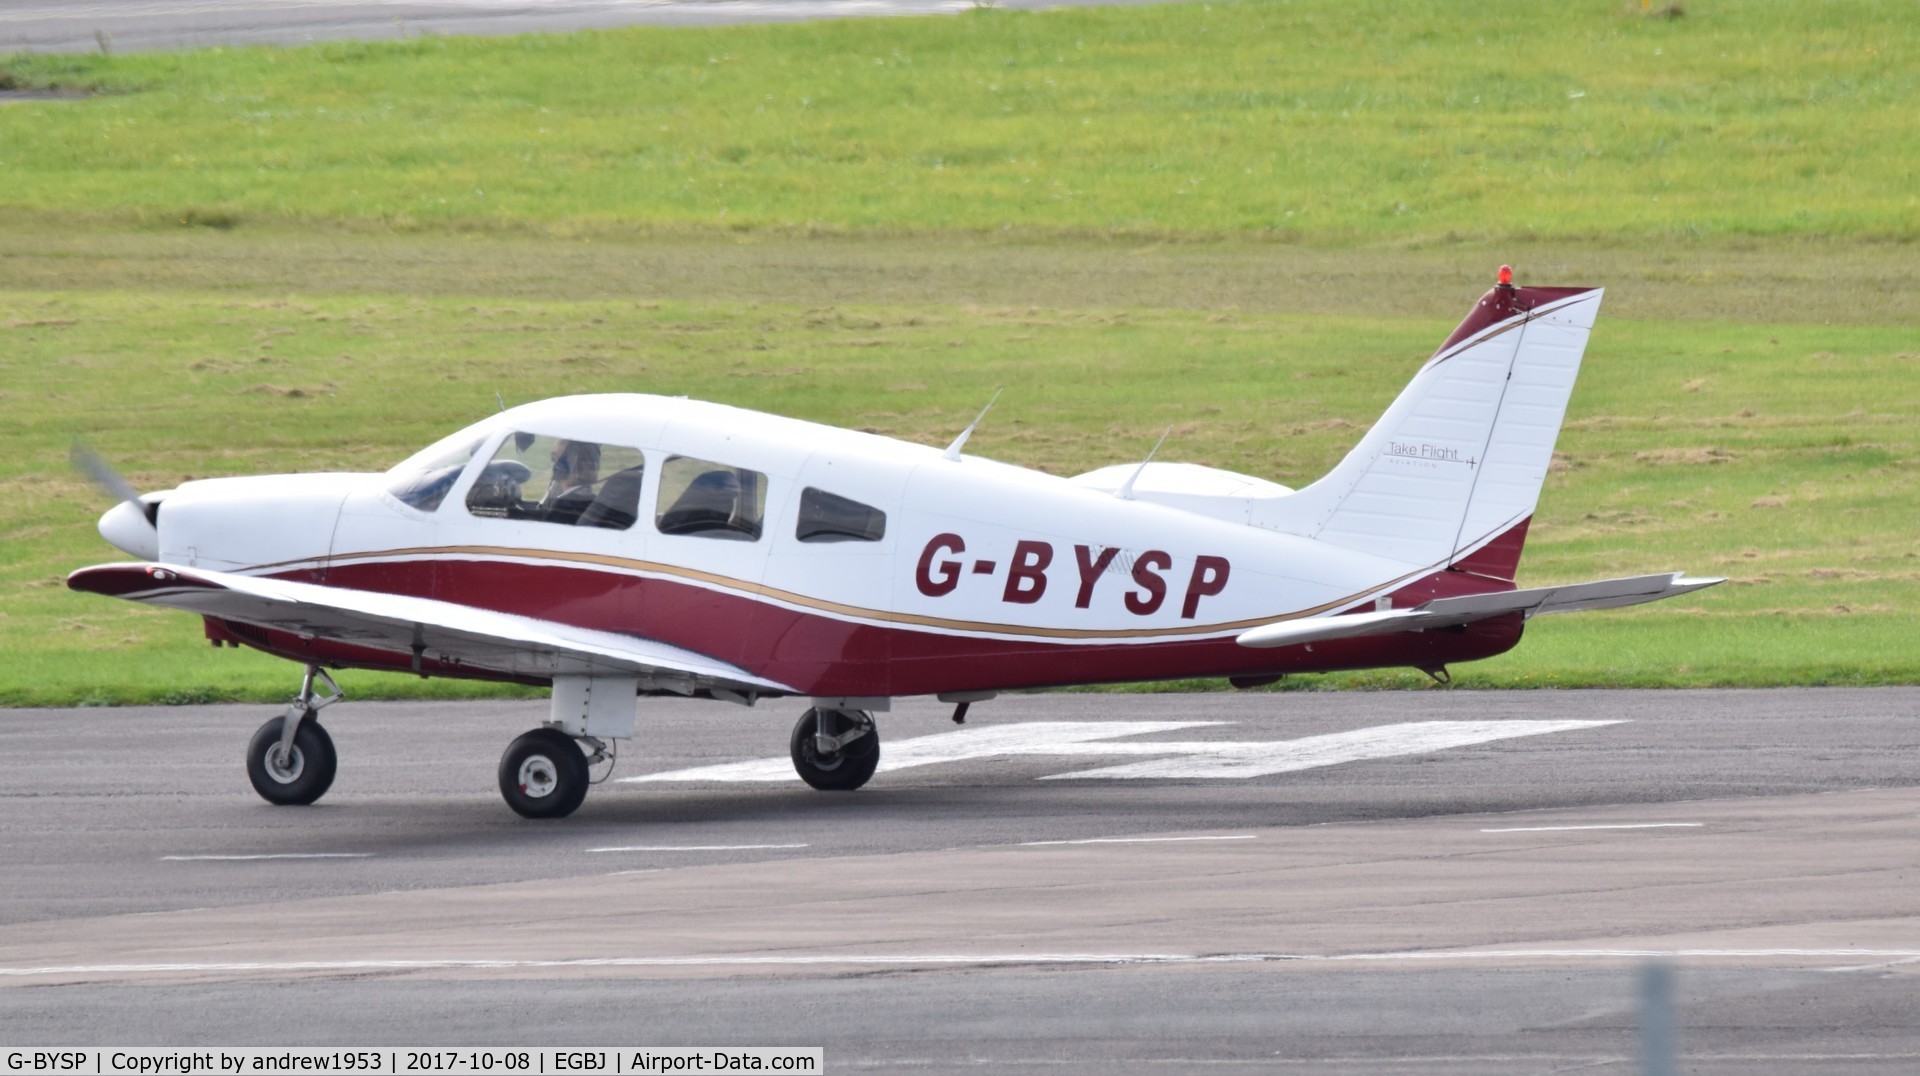 G-BYSP, 1985 Piper PA-28-181 Cherokee Archer II C/N 28-8590047, G-BYSP at Gloucestershire Airport.